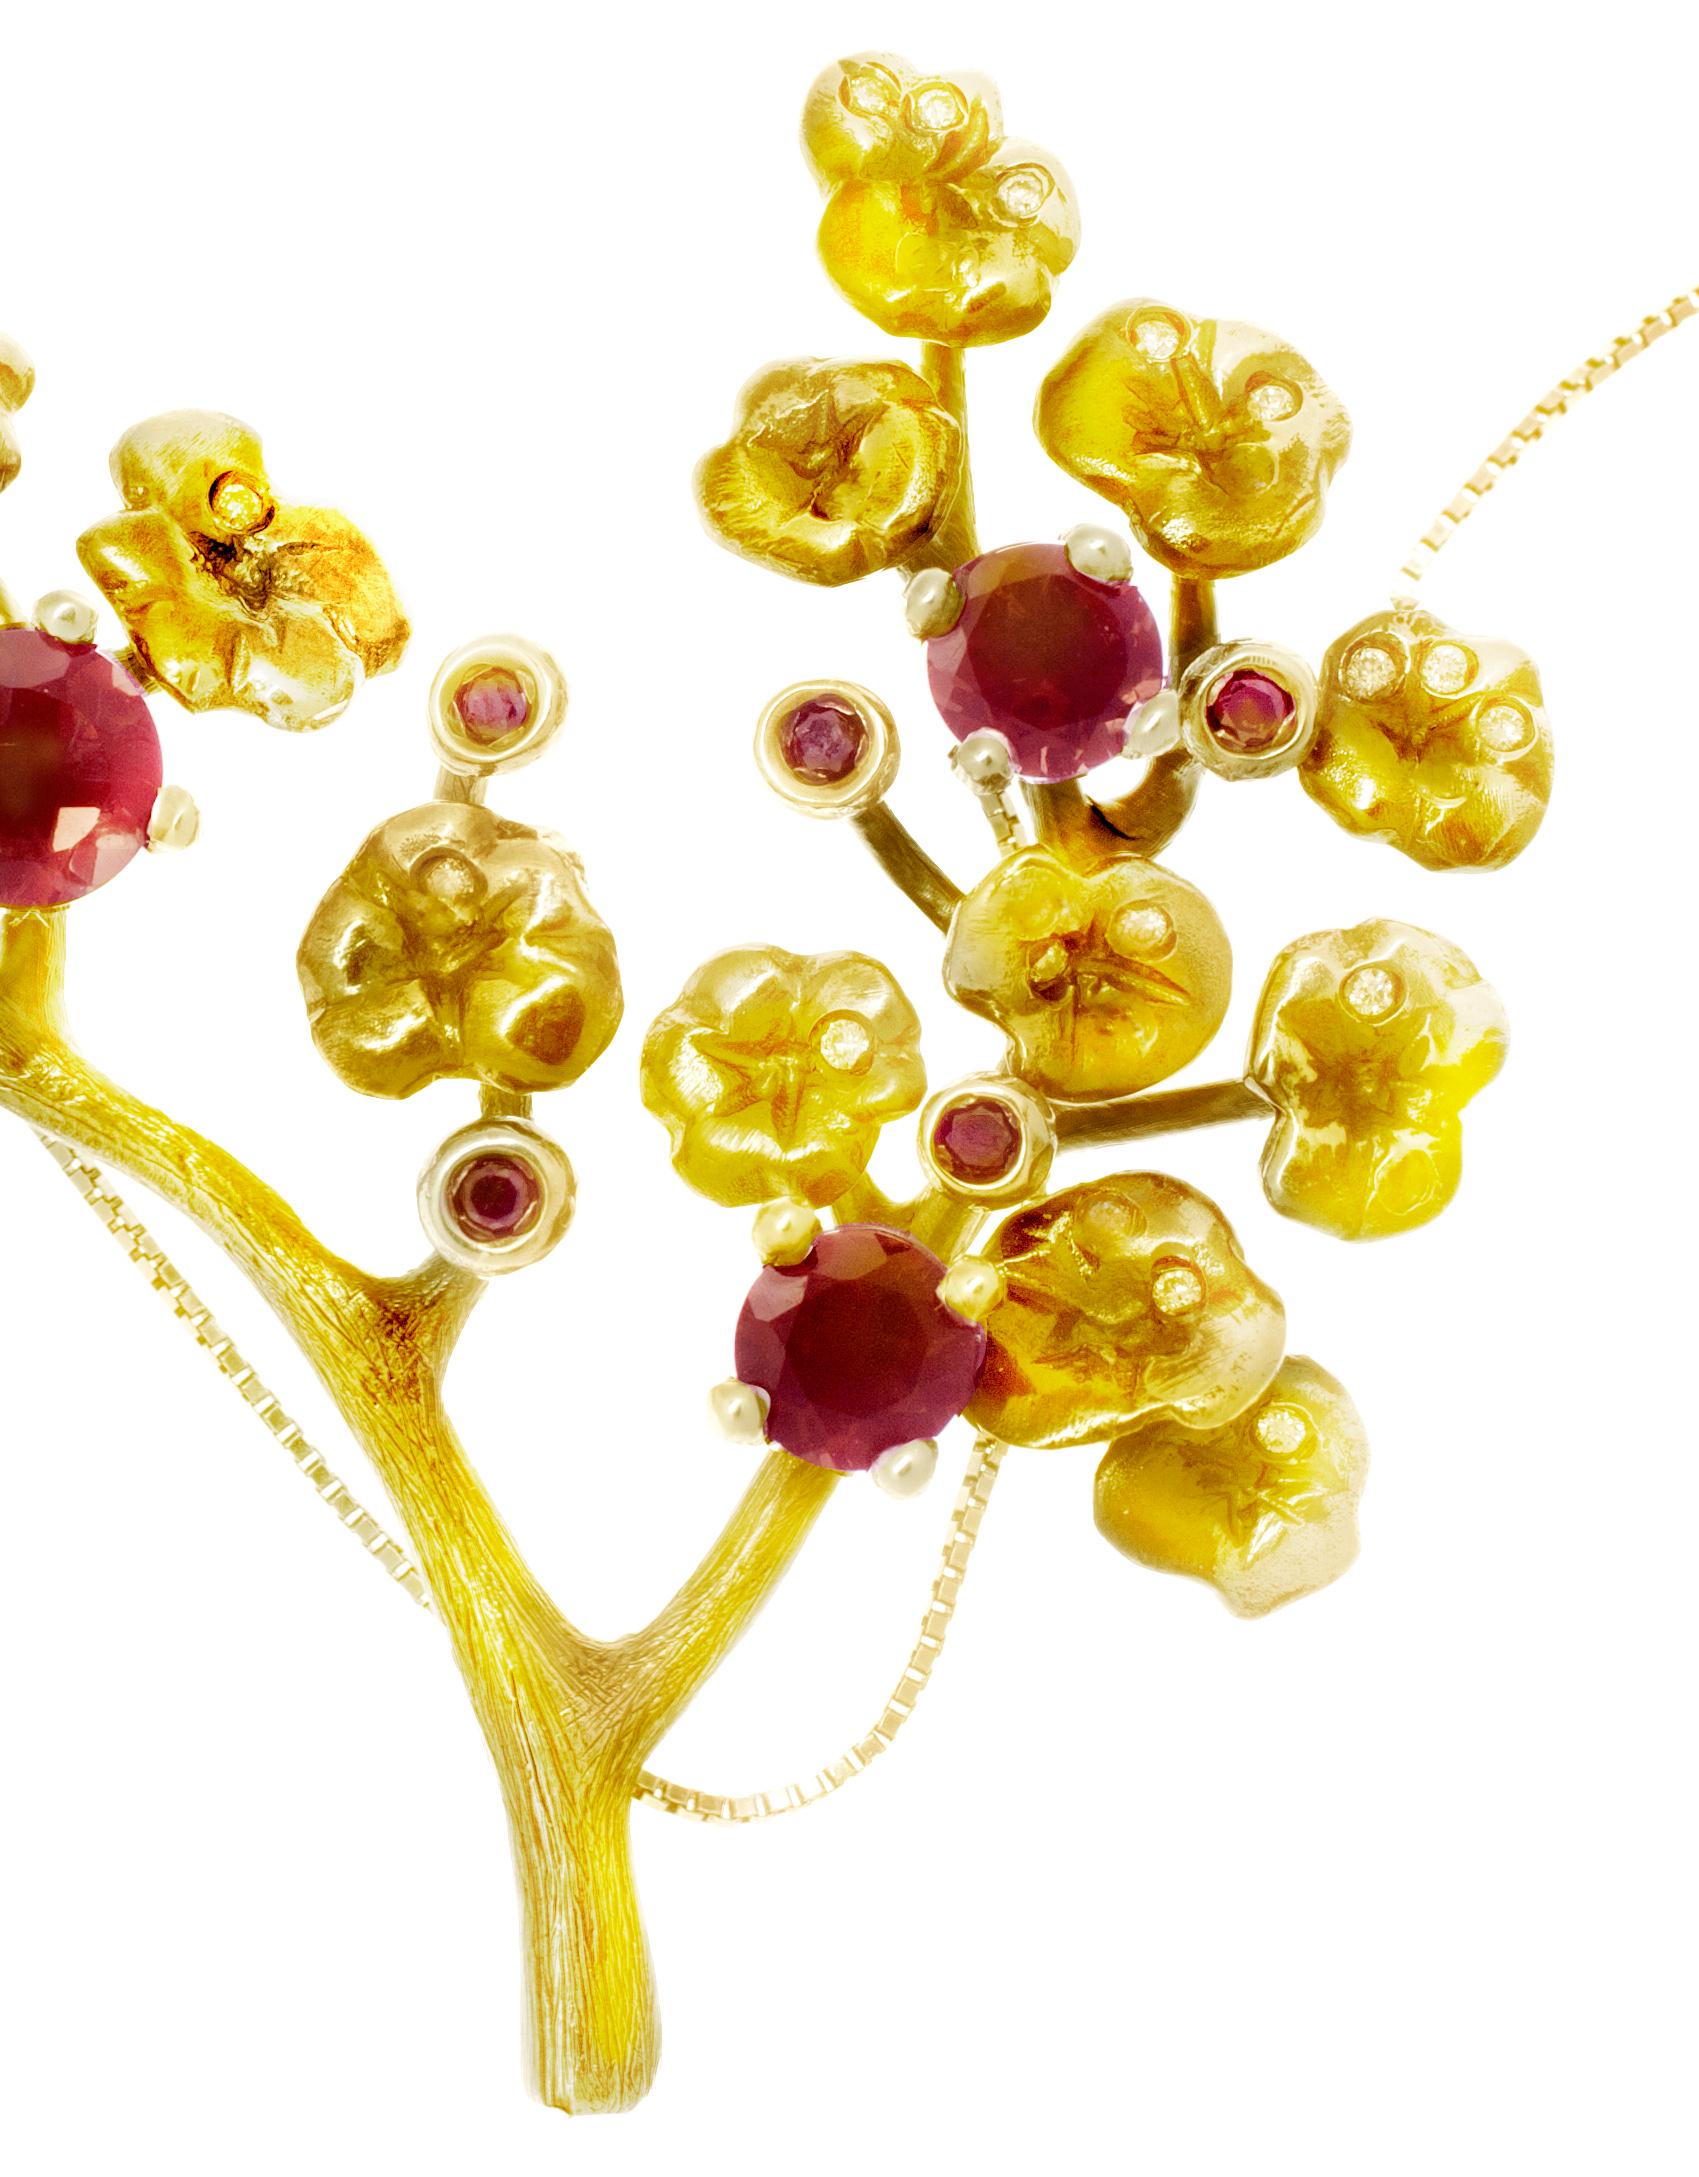 Artist Eighteen Karat Gold Heliotrope Necklace with Rubies and Diamonds For Sale